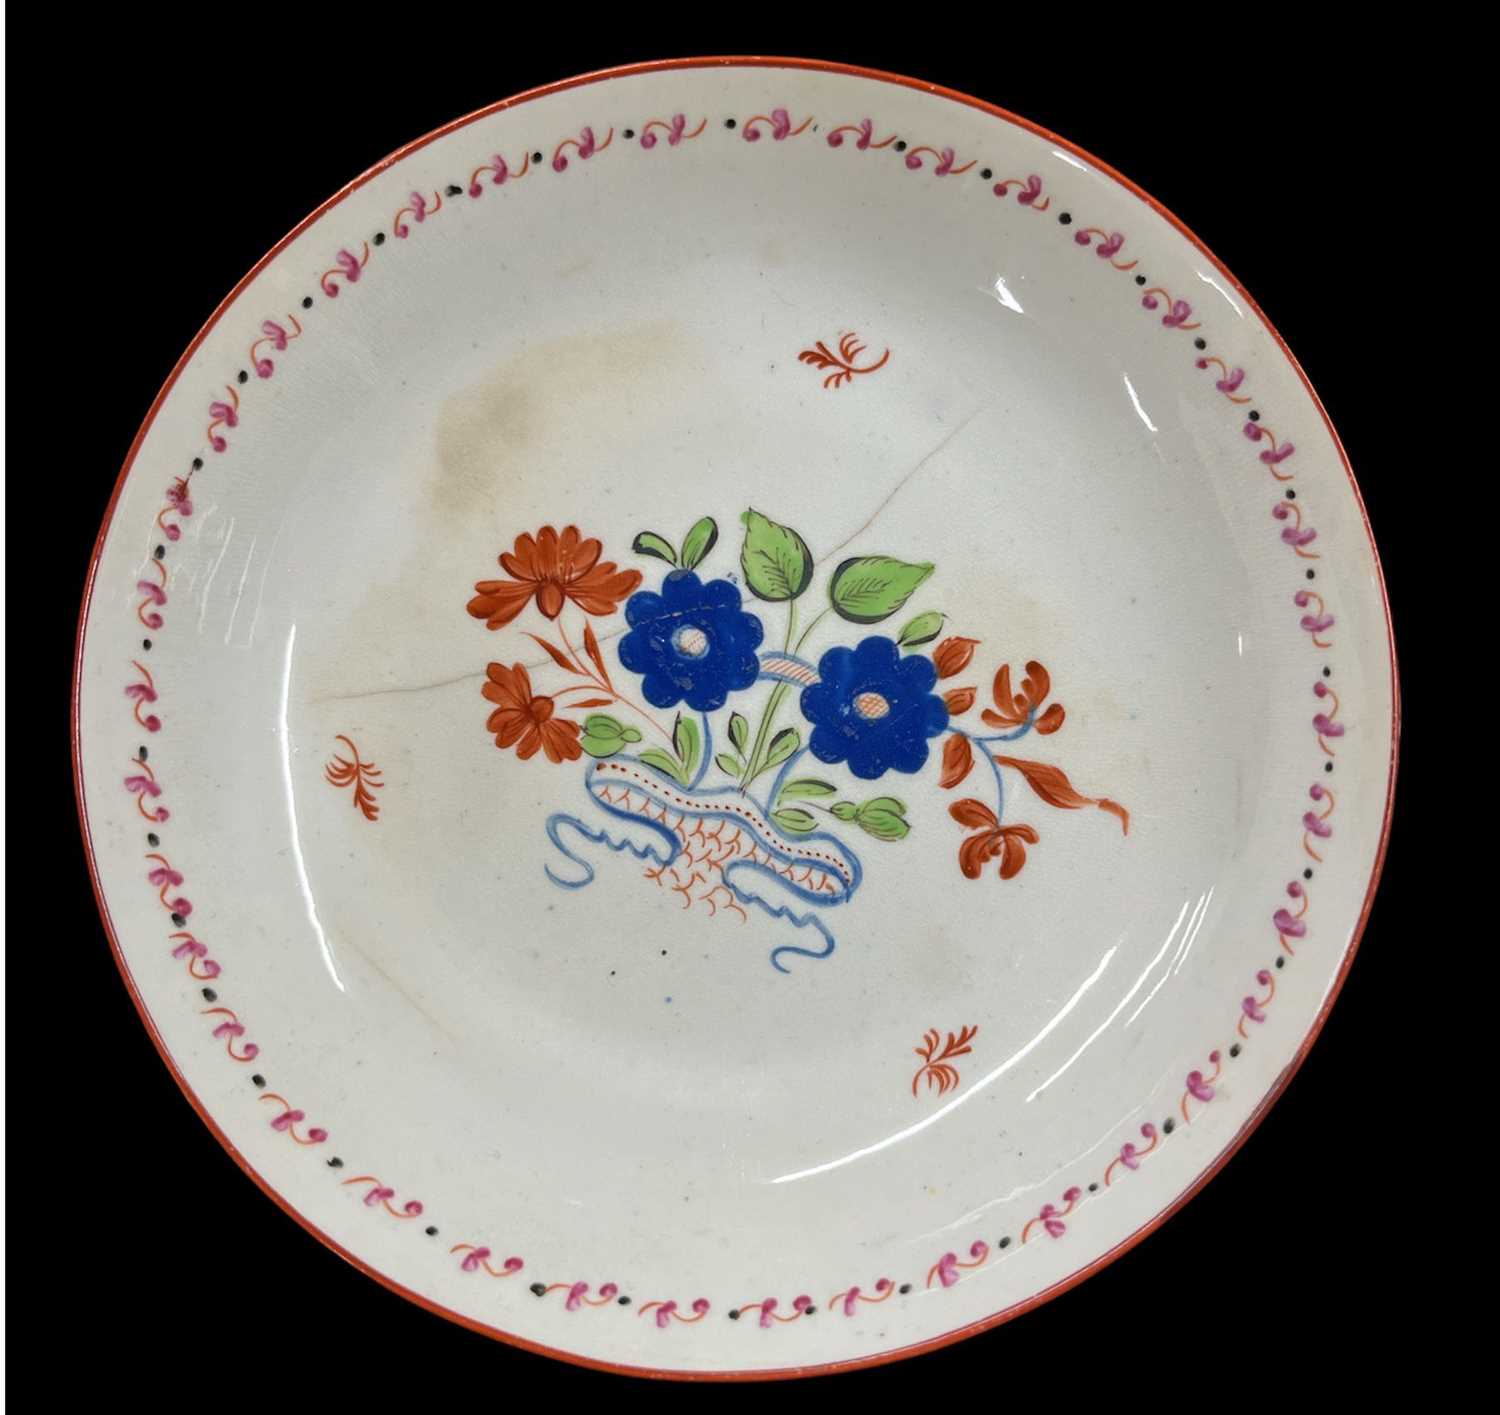 Two 18th century English porcelain saucers by Newhall